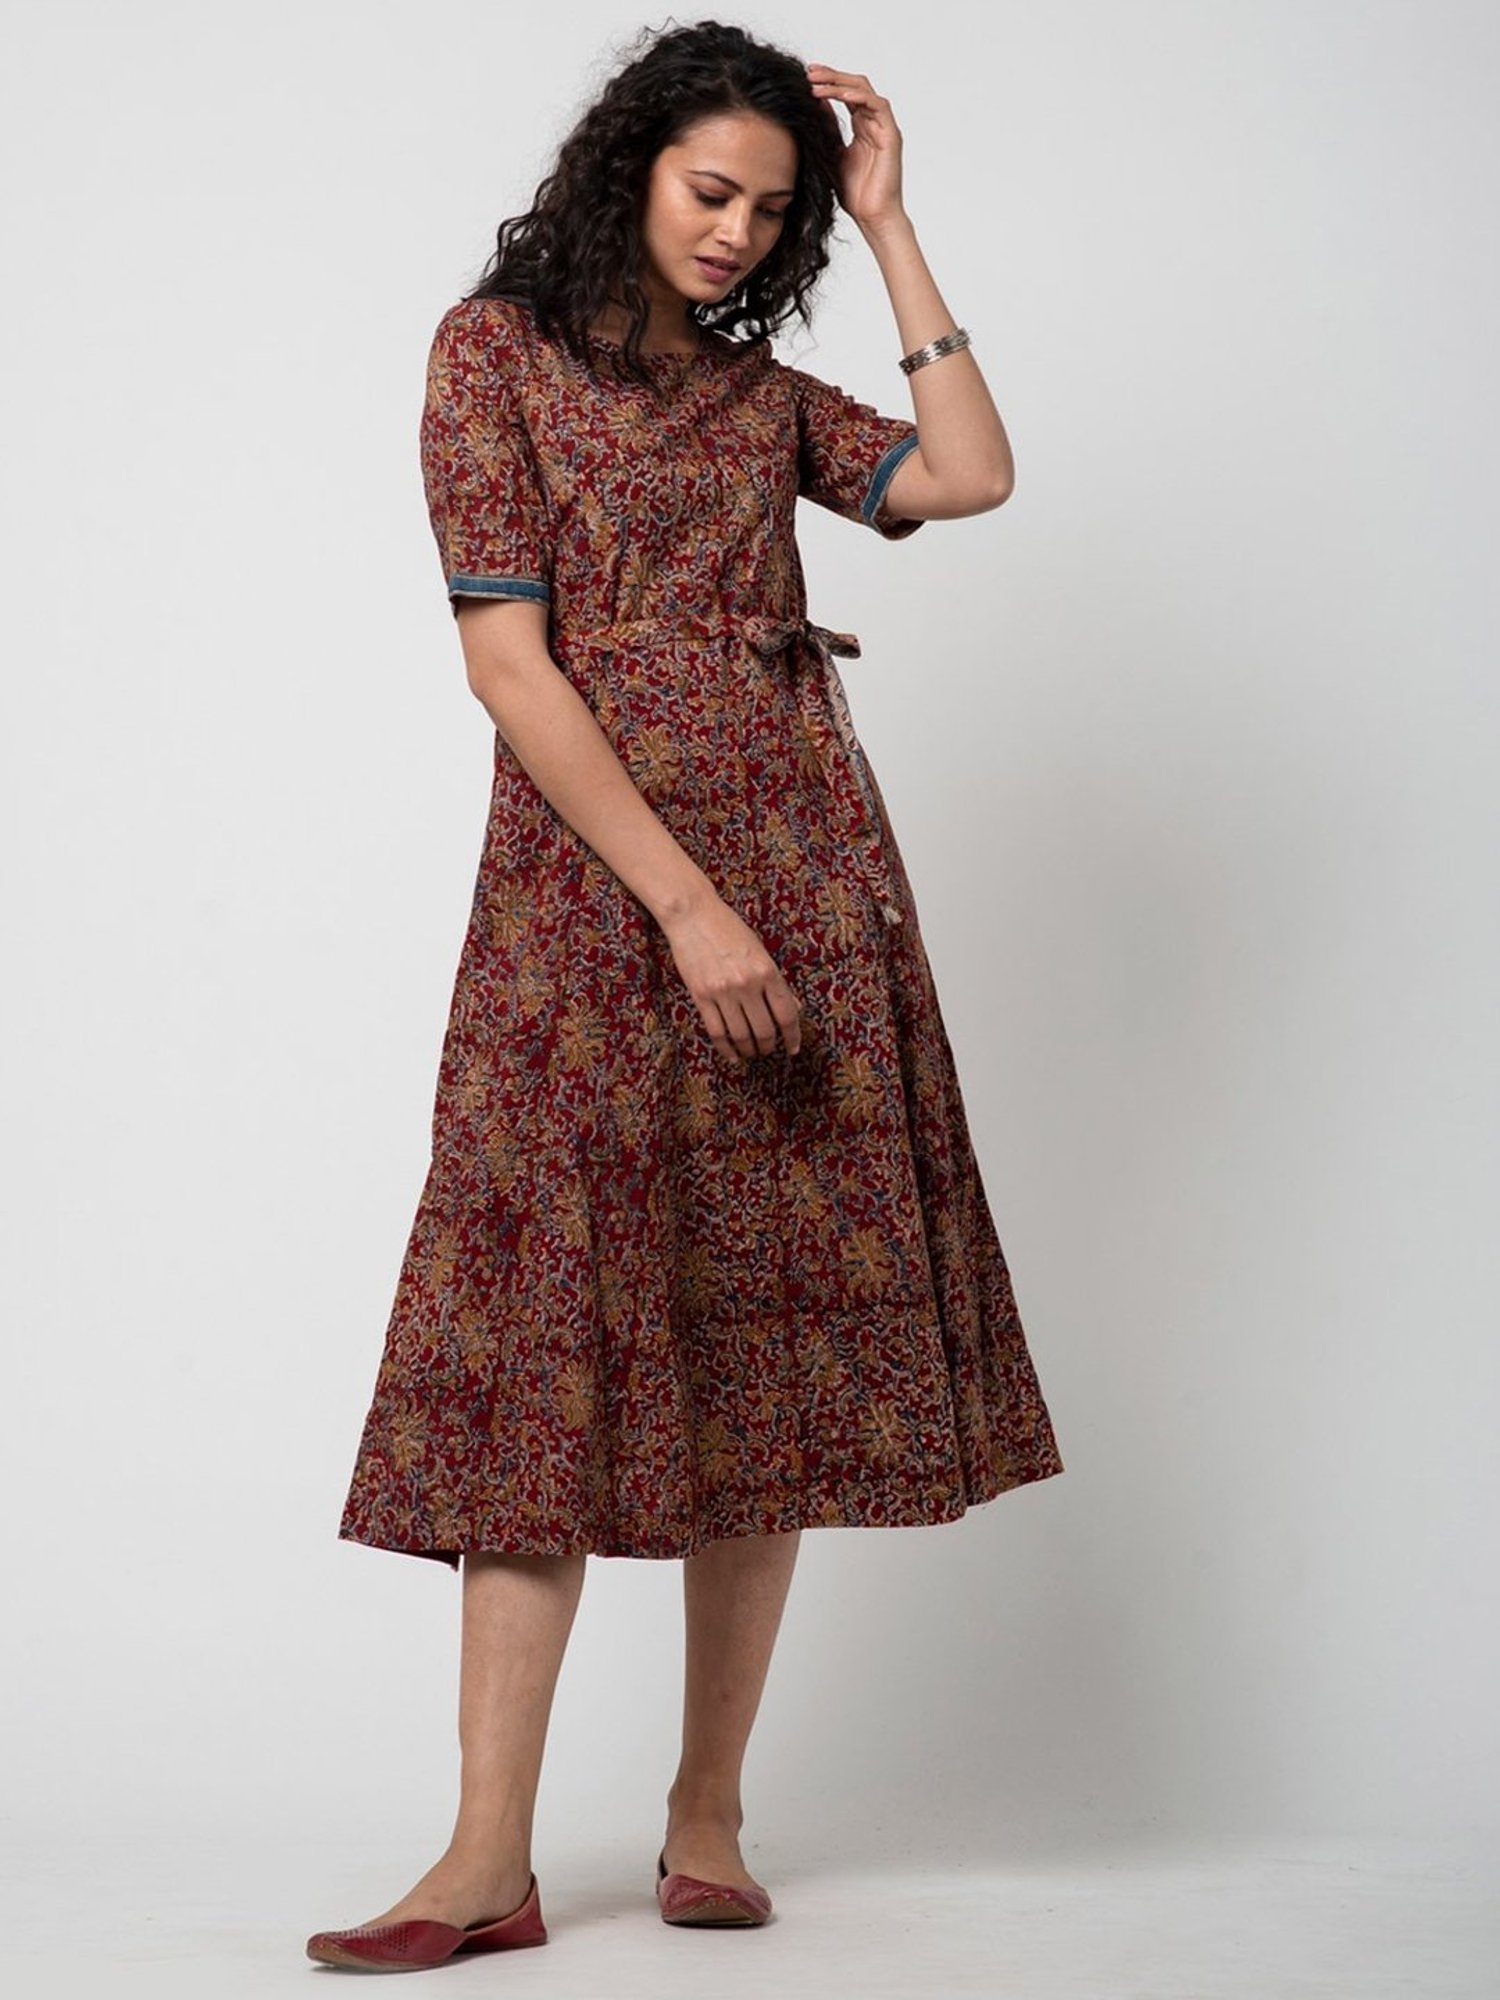 Fabindia - When rich craft and contemporary style go hand in hand. Shop for  some of the finest #Chikankari dresses by #Fabindia. http://bit.ly/2EoCAy3  | Facebook